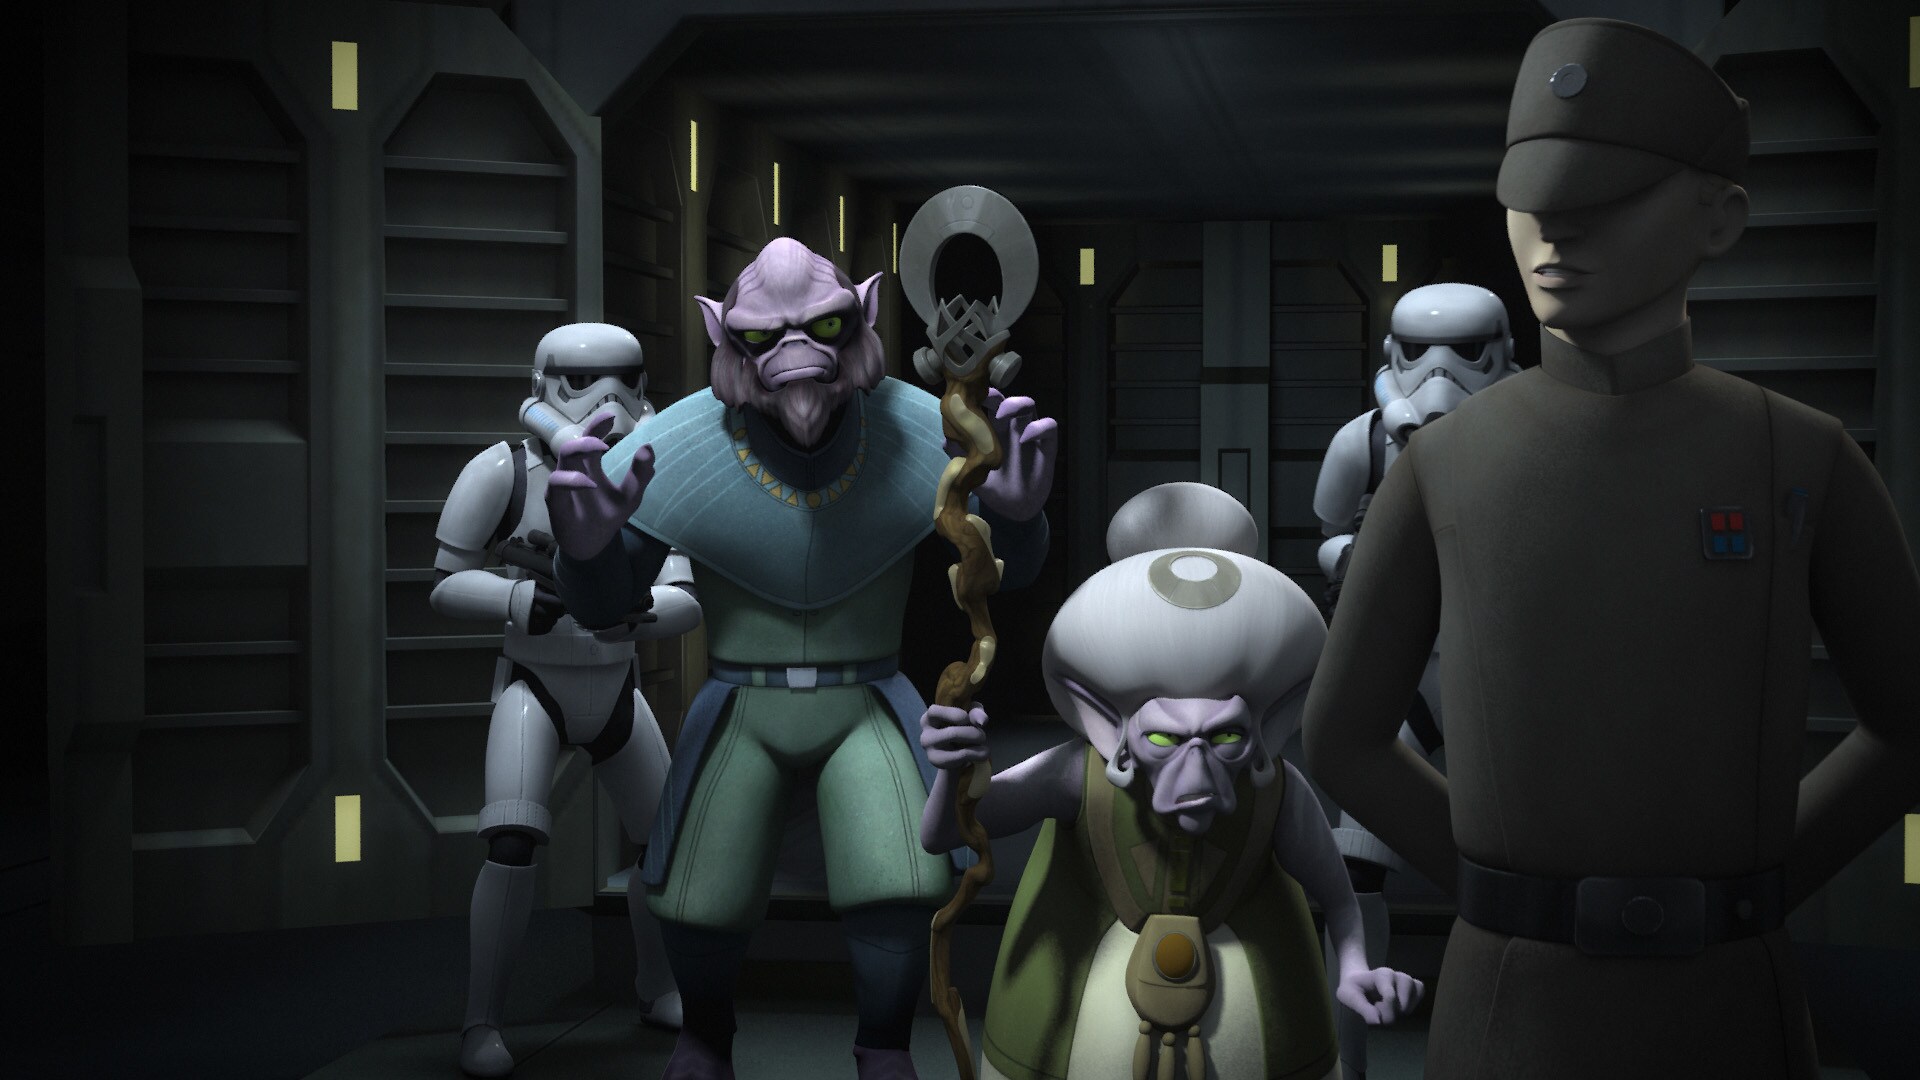 ...Lasat. Zeb, who long thought he himself was the last of his kind, is shocked.